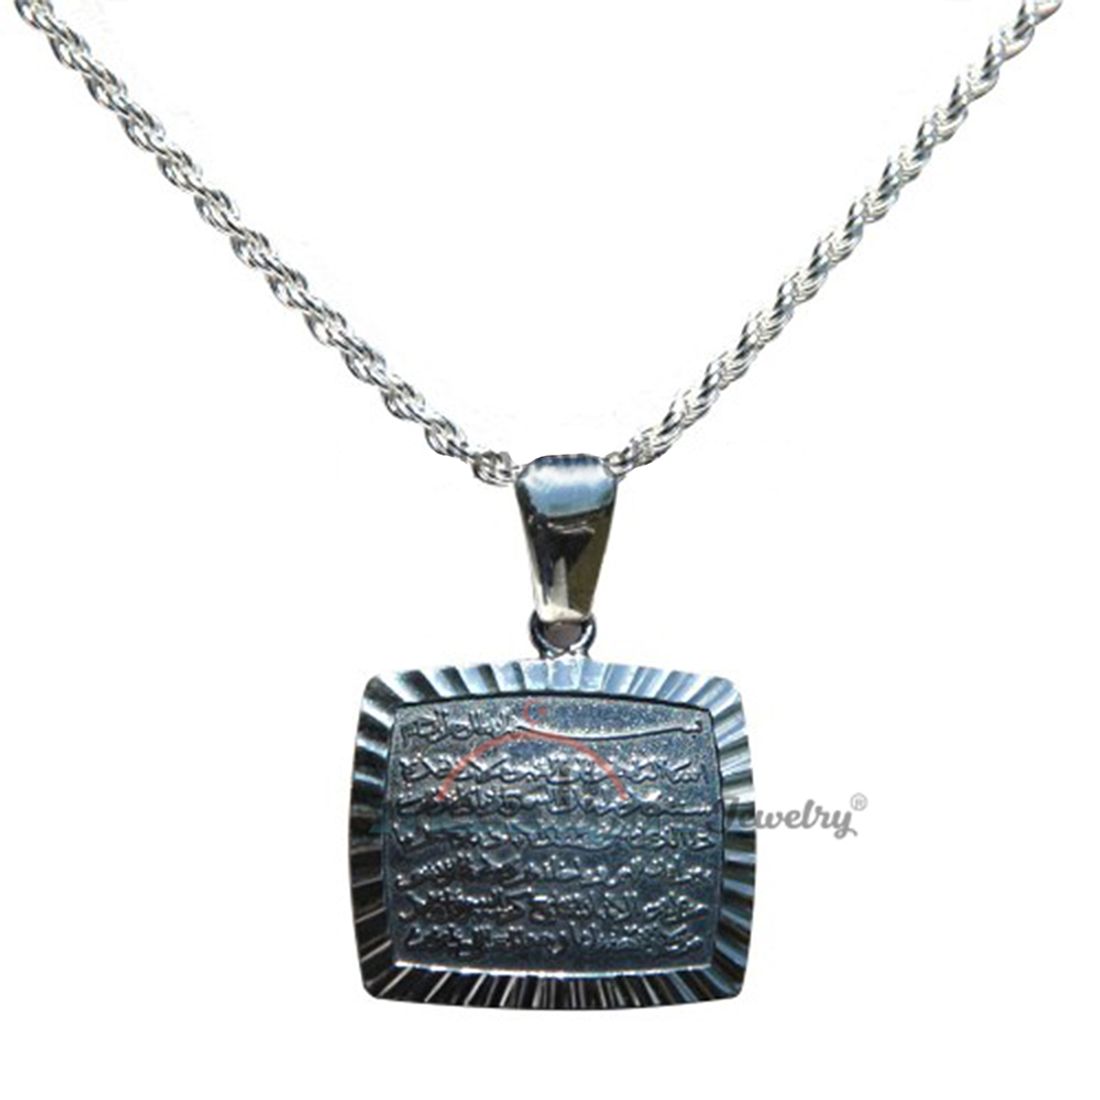 Shiny Square sterling Silver Ayatul-Kursi (Verse of the Throne) Quran Pendant with Italian Rope Chain